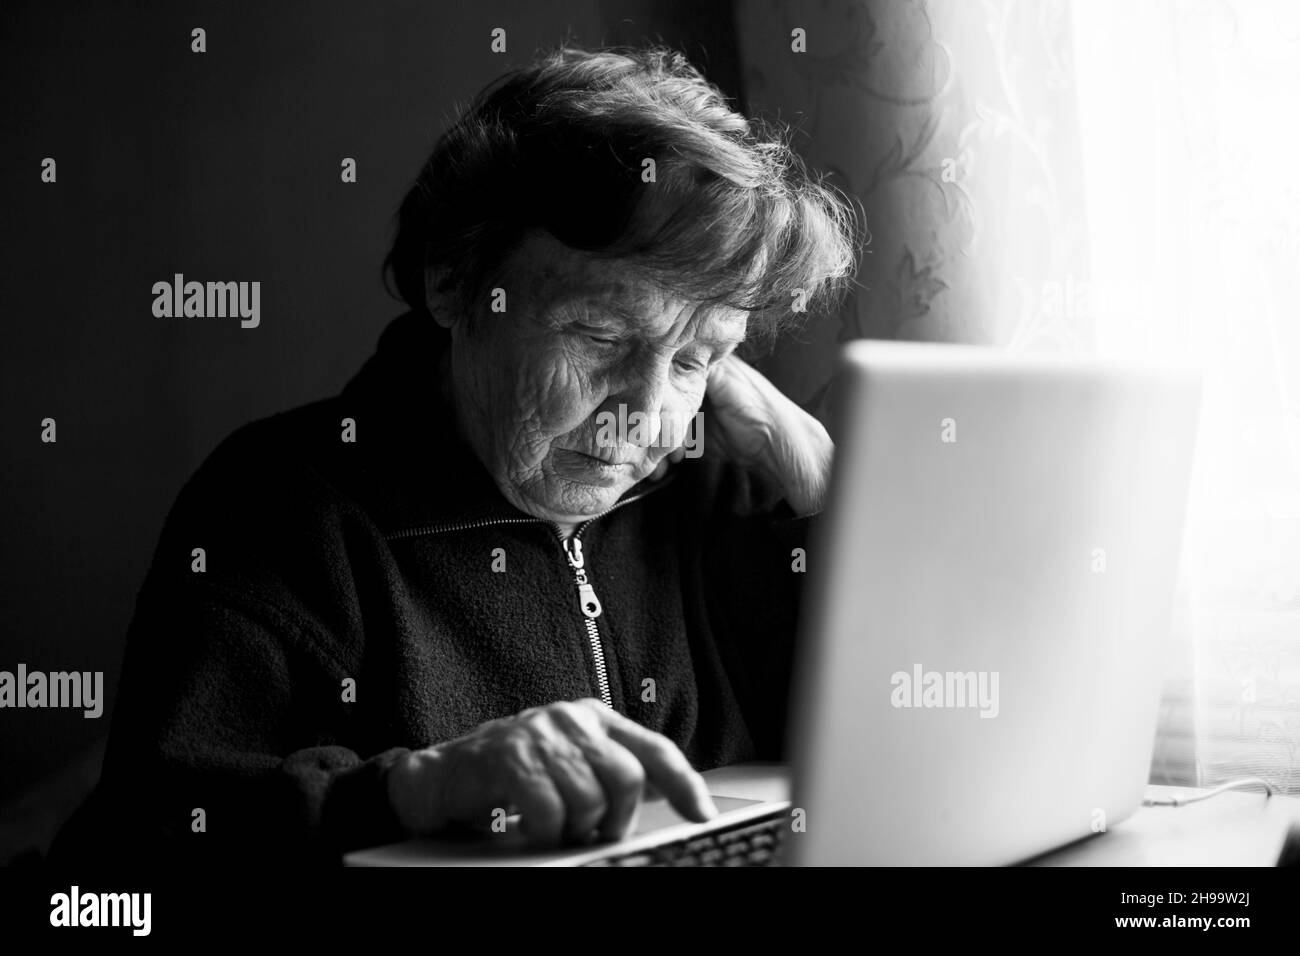 An old woman is learn to type  on a laptop in her home. Black and white photo. Stock Photo